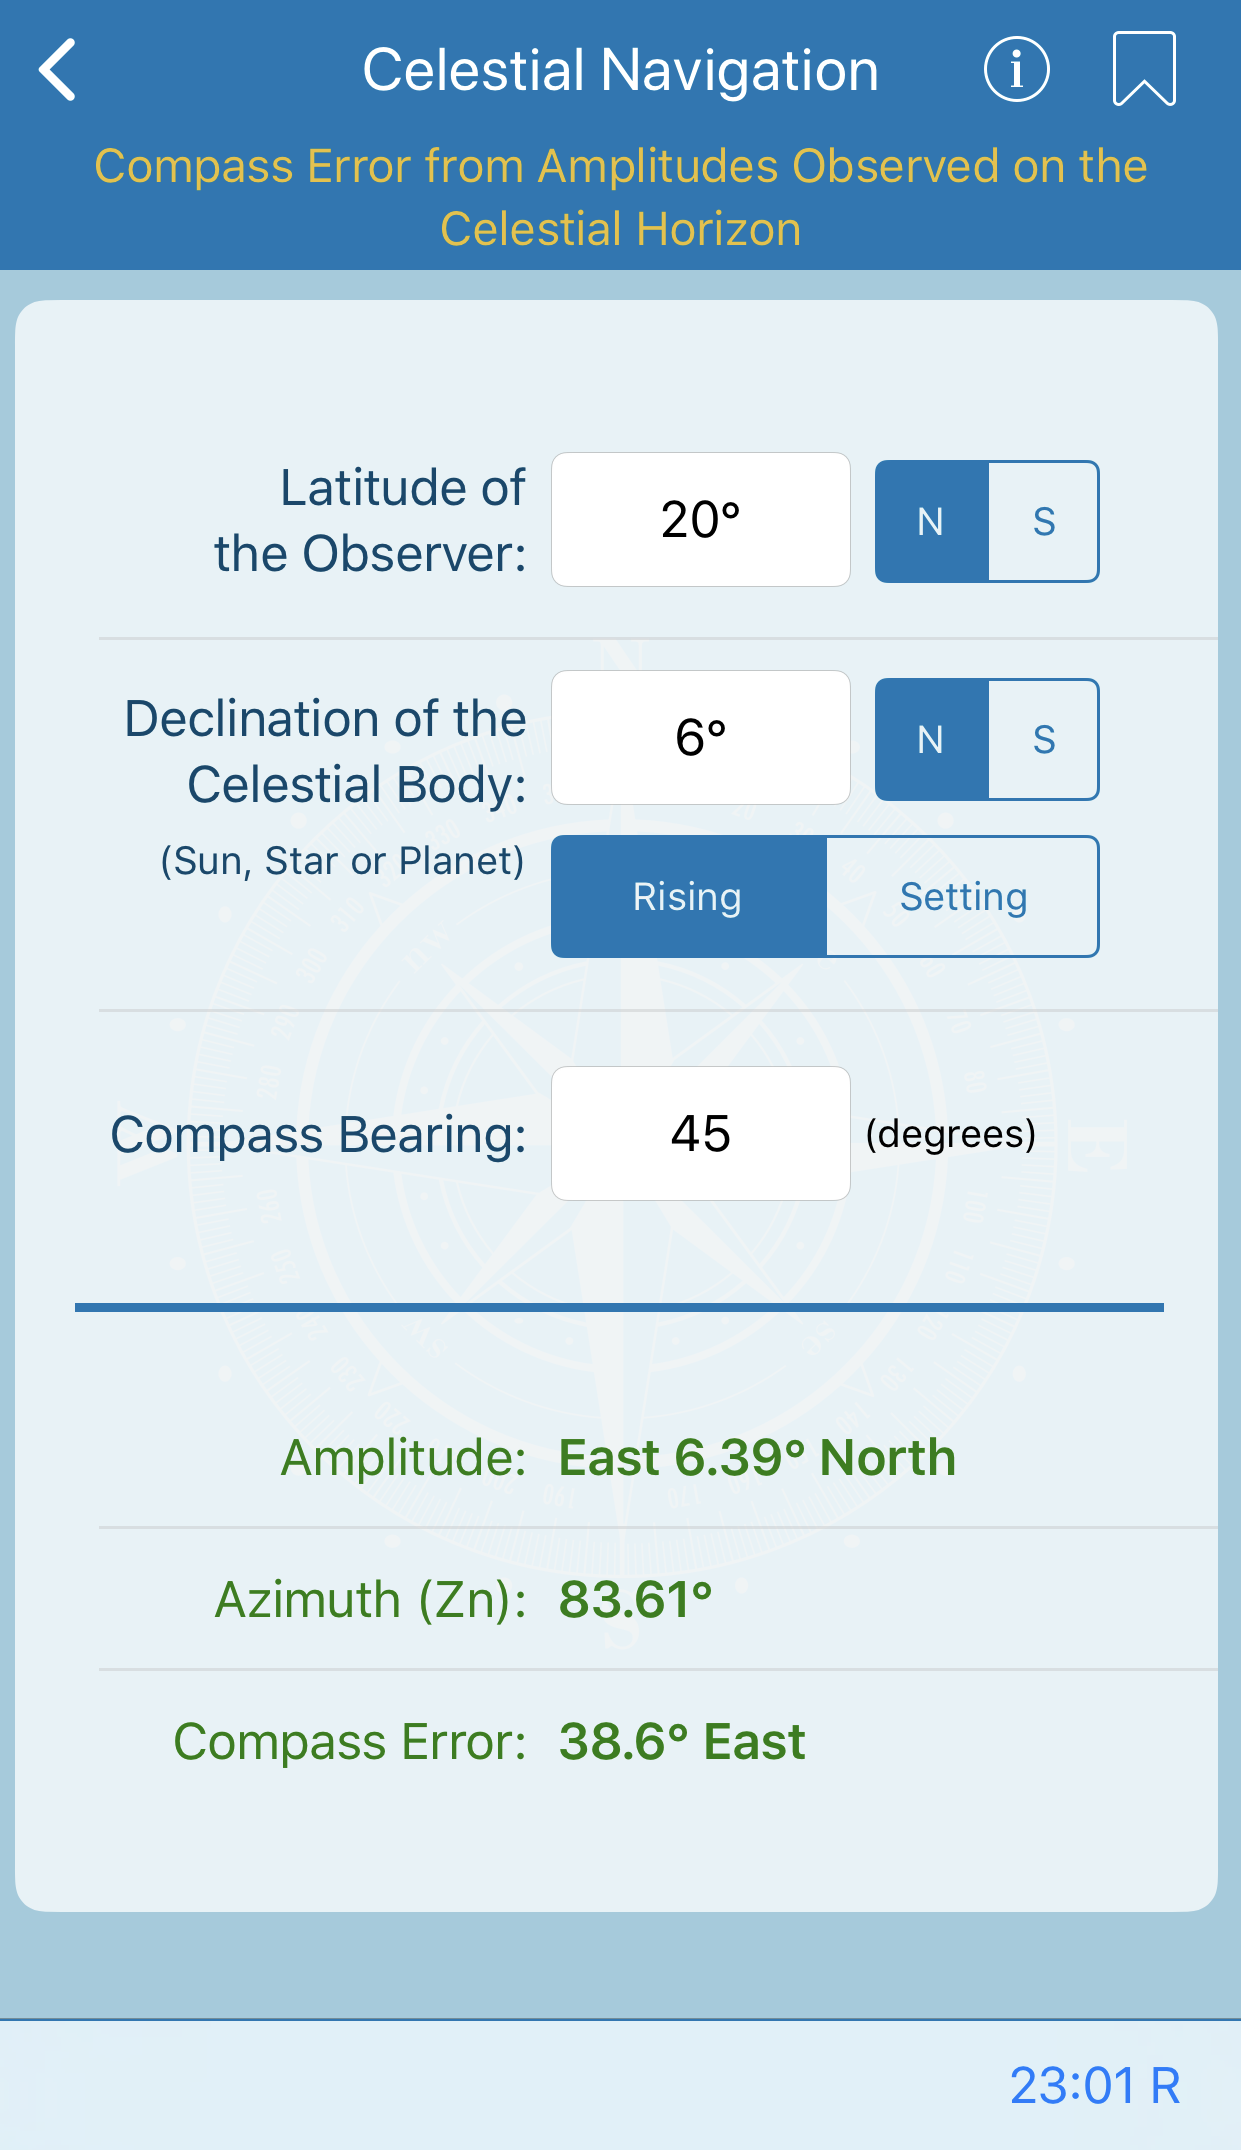 Compass Error from Amplitudes Observed on the Celestial Horizon